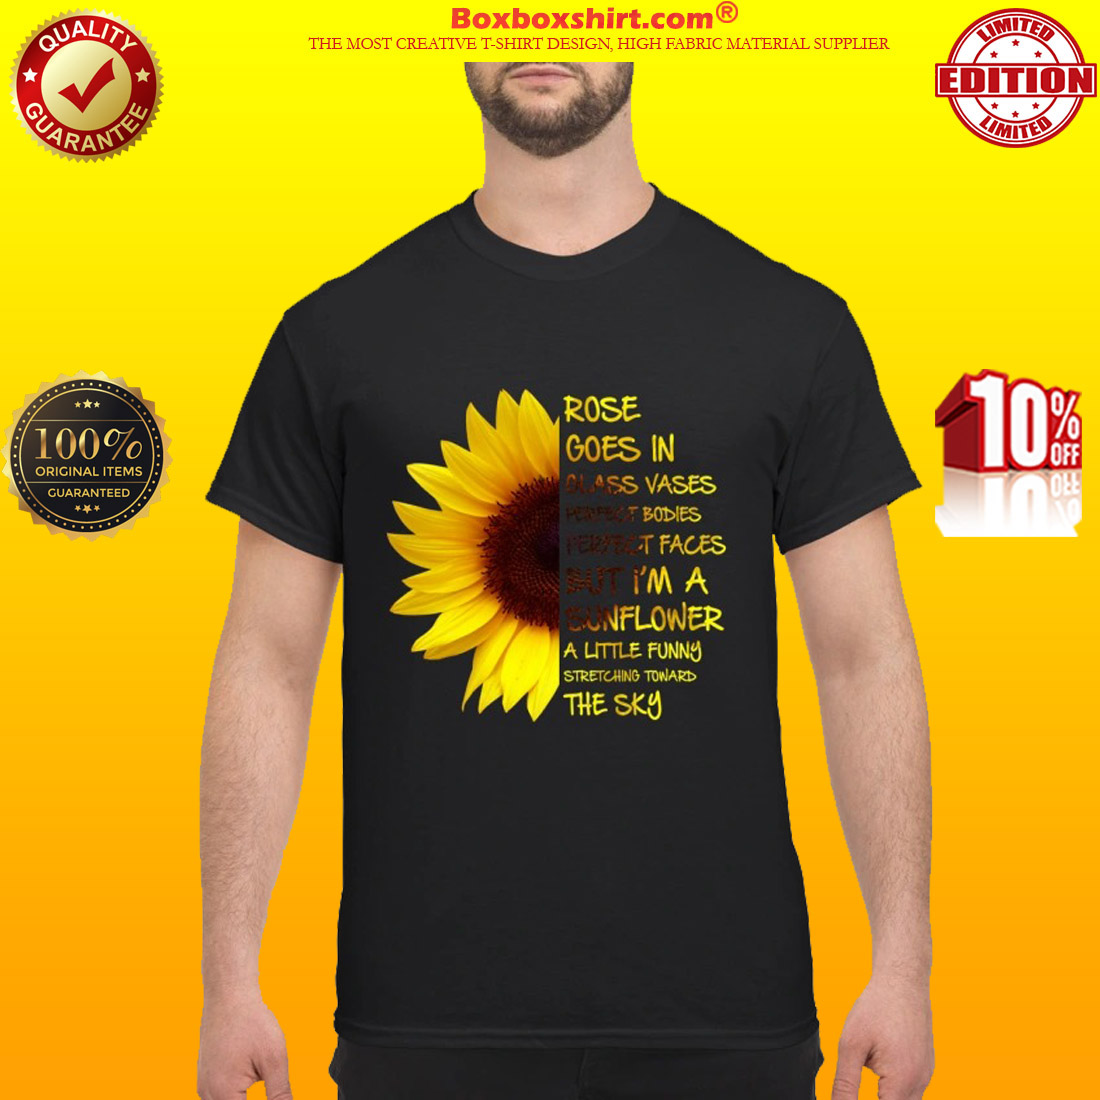 Rose goes in Glass vases perfect bodies perfect faces sunflower classic shirt